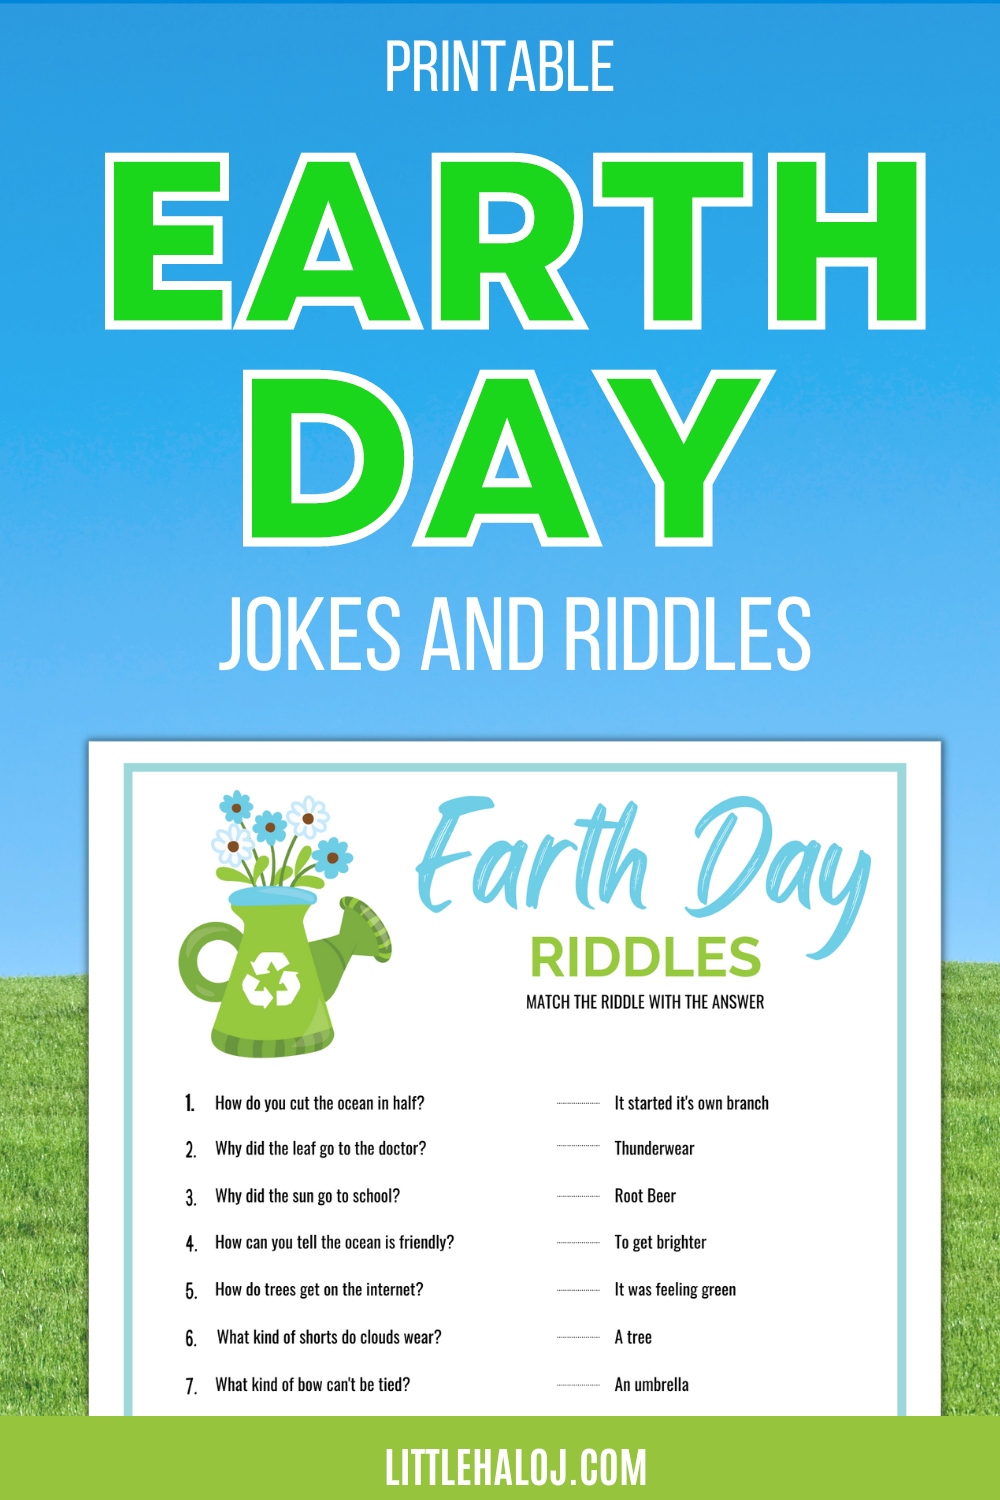 Printable Earth Day Riddles and Jokes